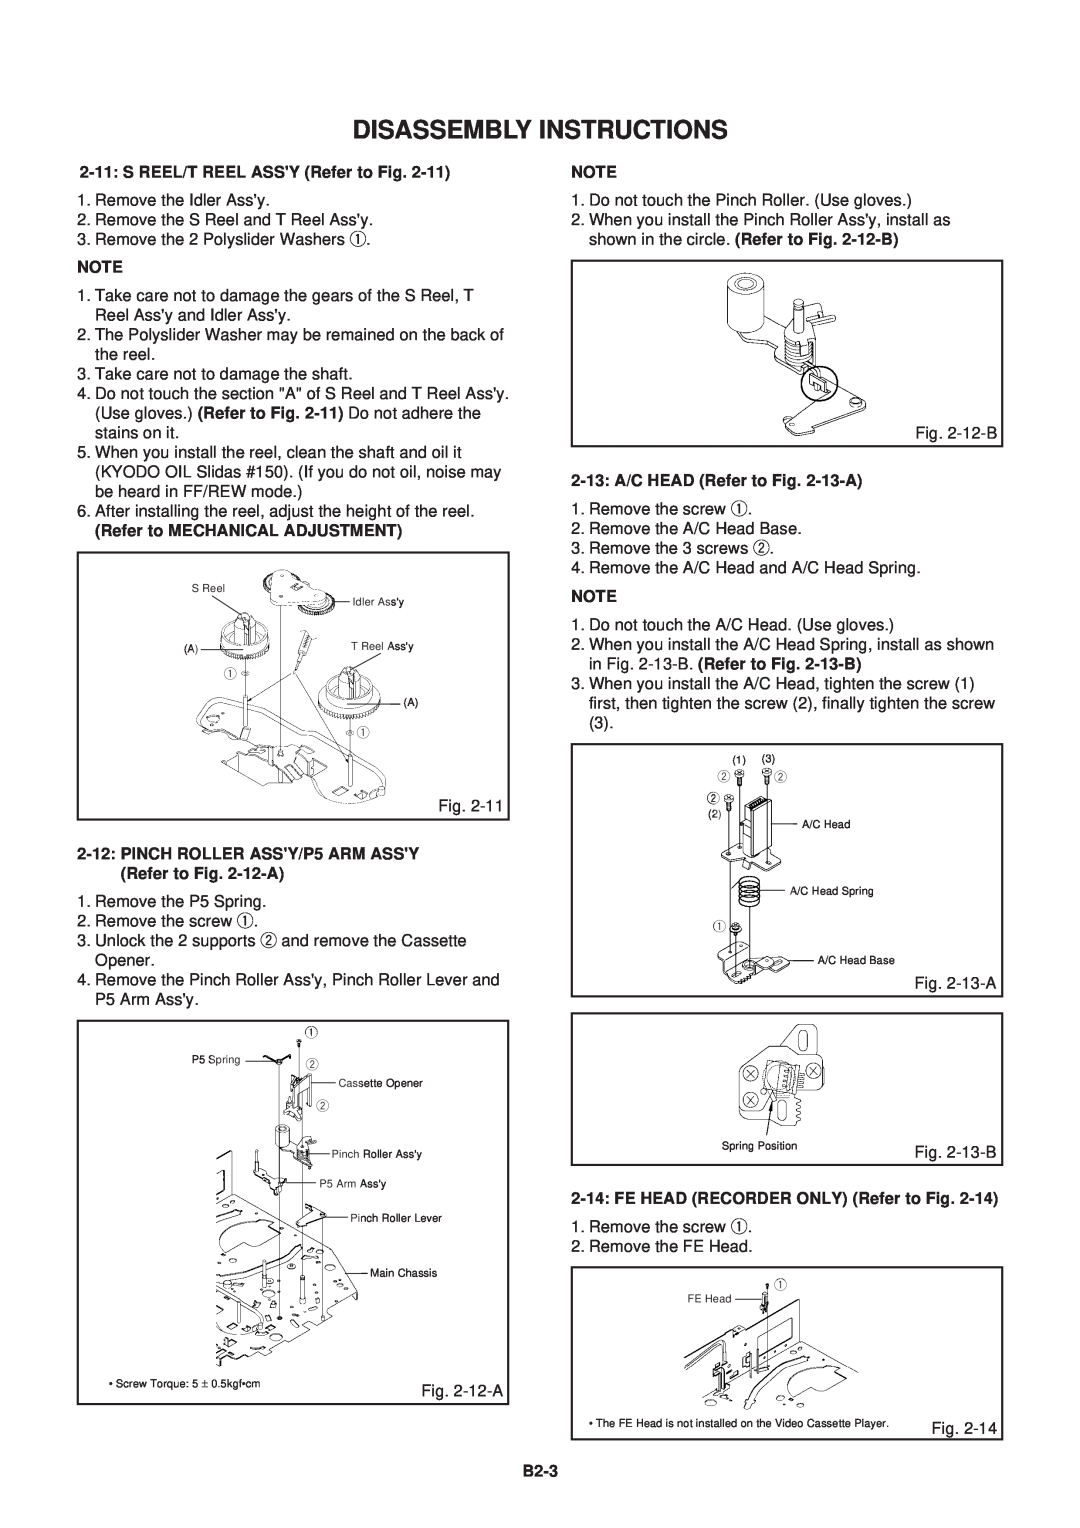 Aiwa HV-FX5100 Disassembly Instructions, S REEL/T REEL ASSY Refer to Fig, Refer to MECHANICAL ADJUSTMENT, B2-3 